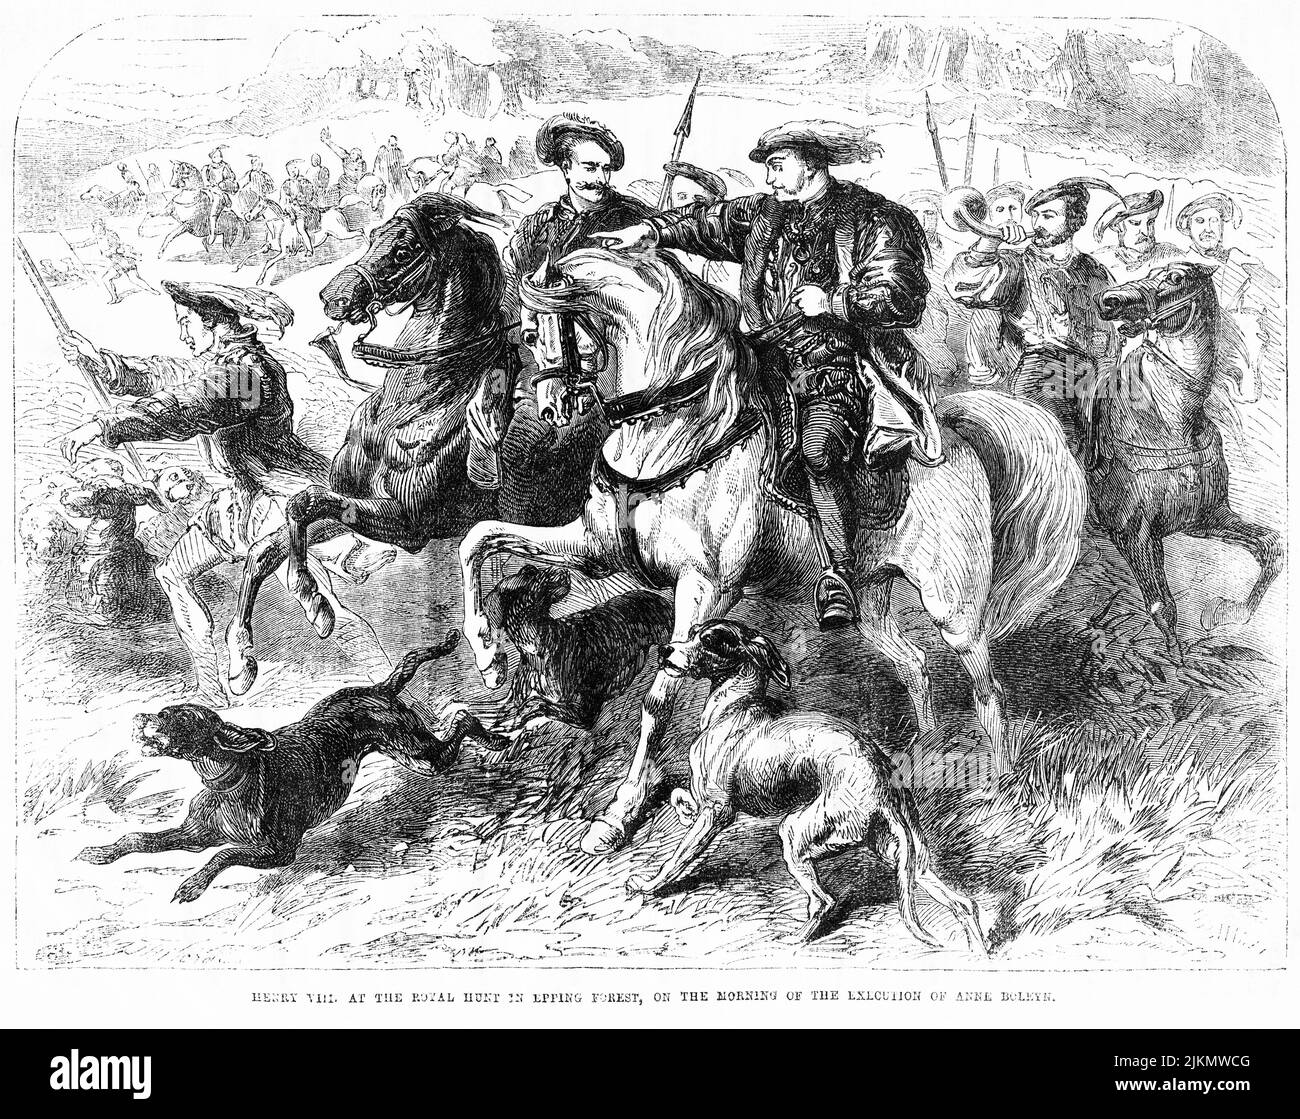 Henry VIII at the Royal Hunt in Epping Forest, on the morning of the Execution of Anne Boleyn, Illustration from the Book, 'John Cassel’s Illustrated History of England, Volume II', text by William Howitt, Cassell, Petter, and Galpin, London, 1858 Stock Photo